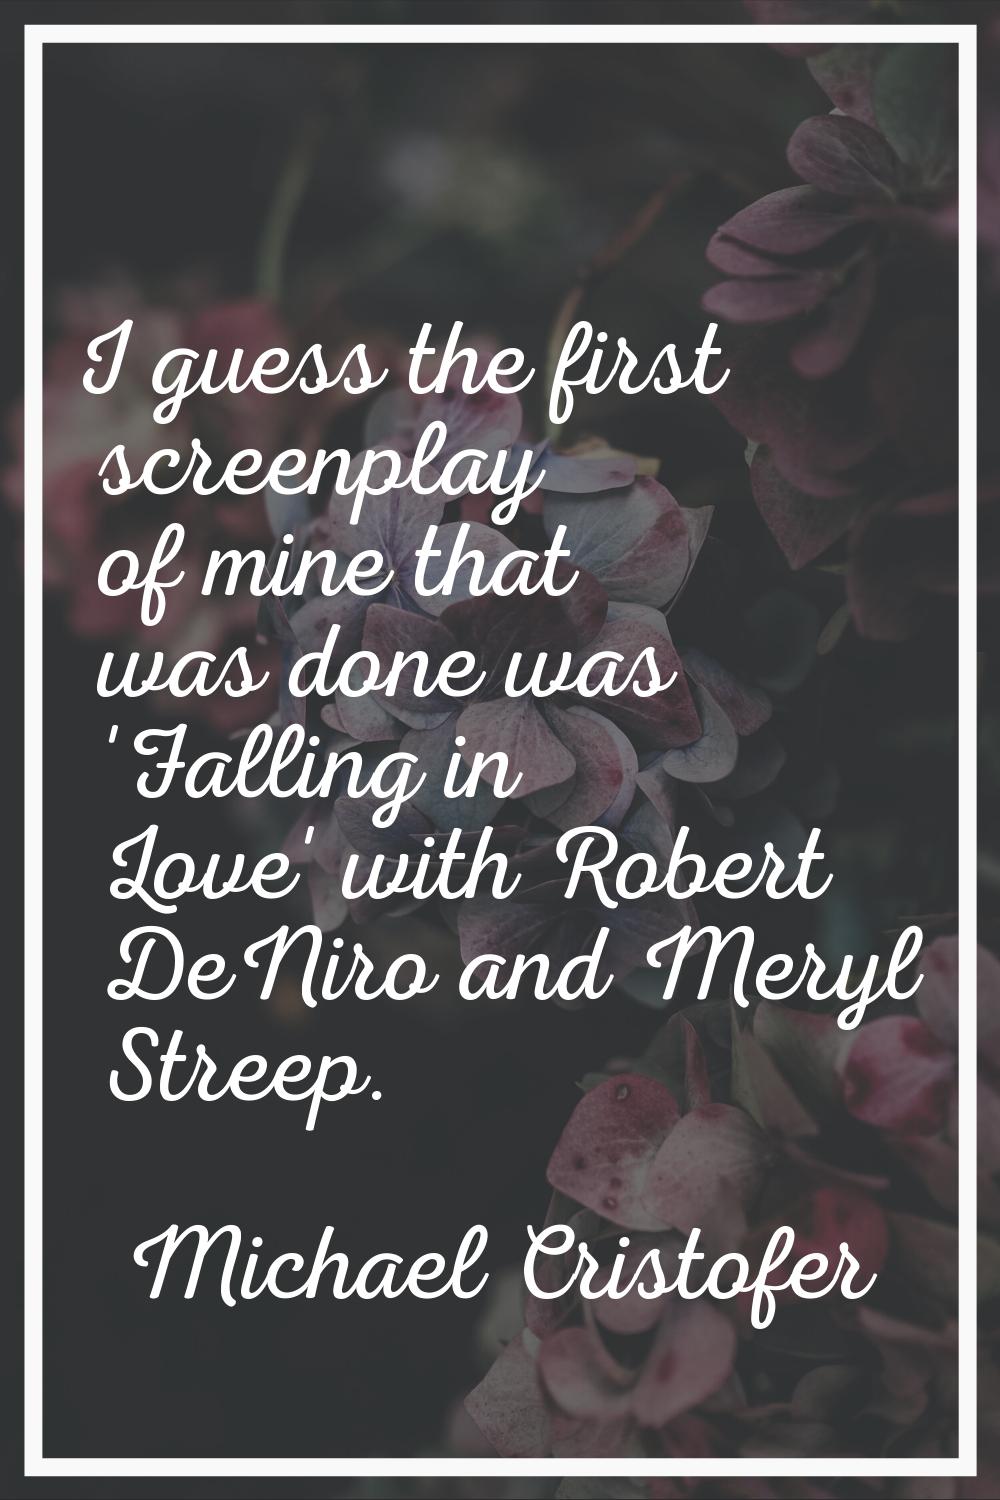 I guess the first screenplay of mine that was done was 'Falling in Love' with Robert DeNiro and Mer